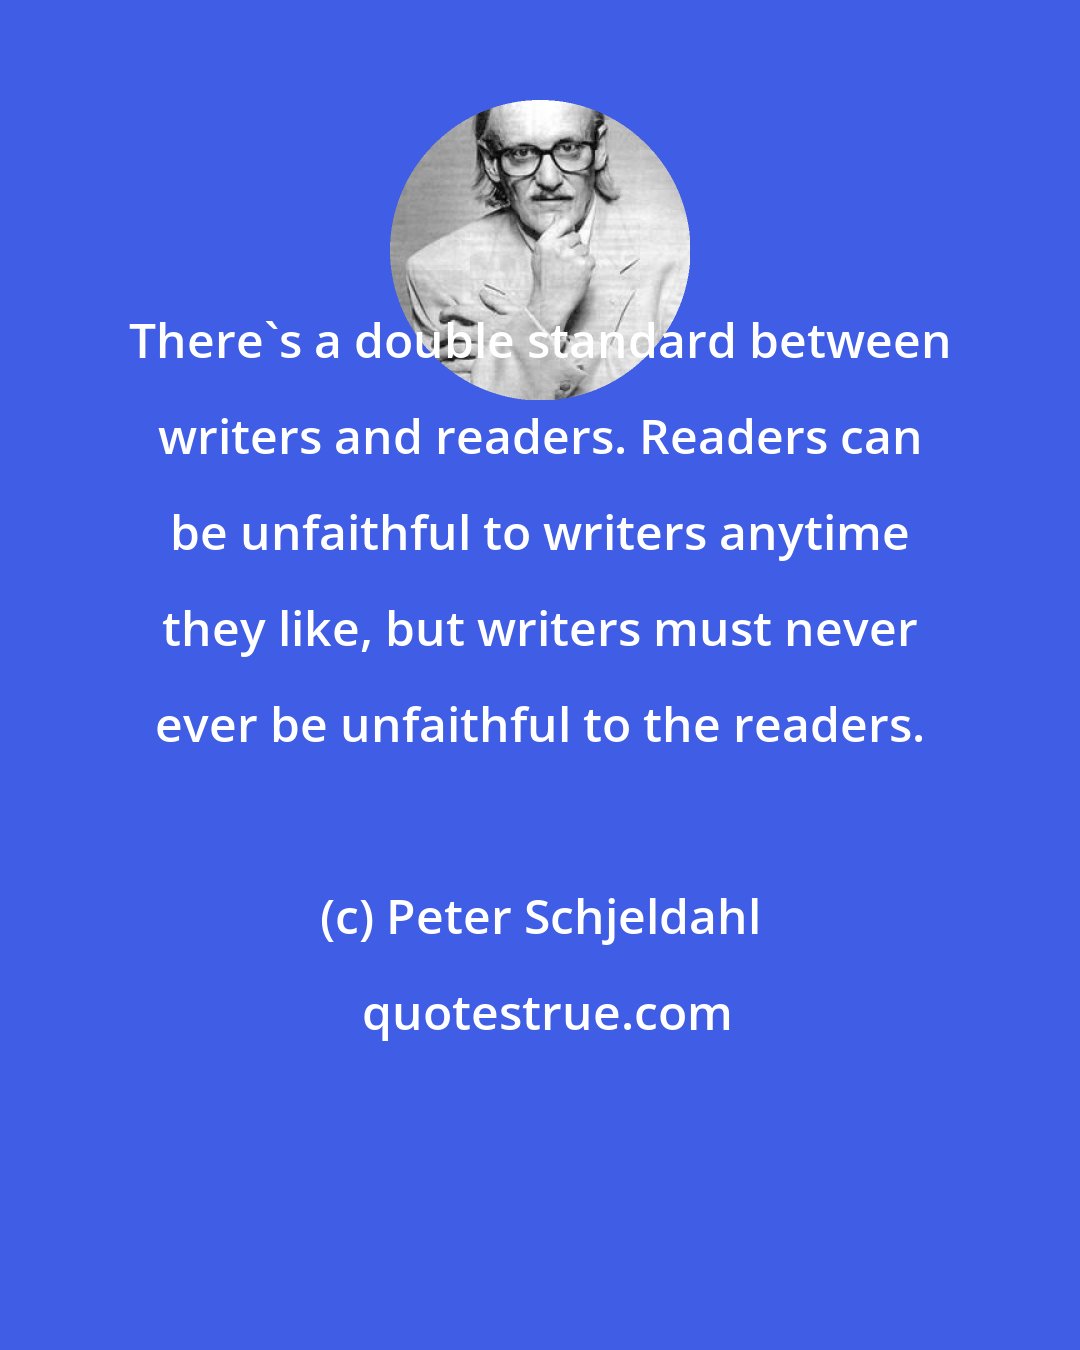 Peter Schjeldahl: There's a double standard between writers and readers. Readers can be unfaithful to writers anytime they like, but writers must never ever be unfaithful to the readers.